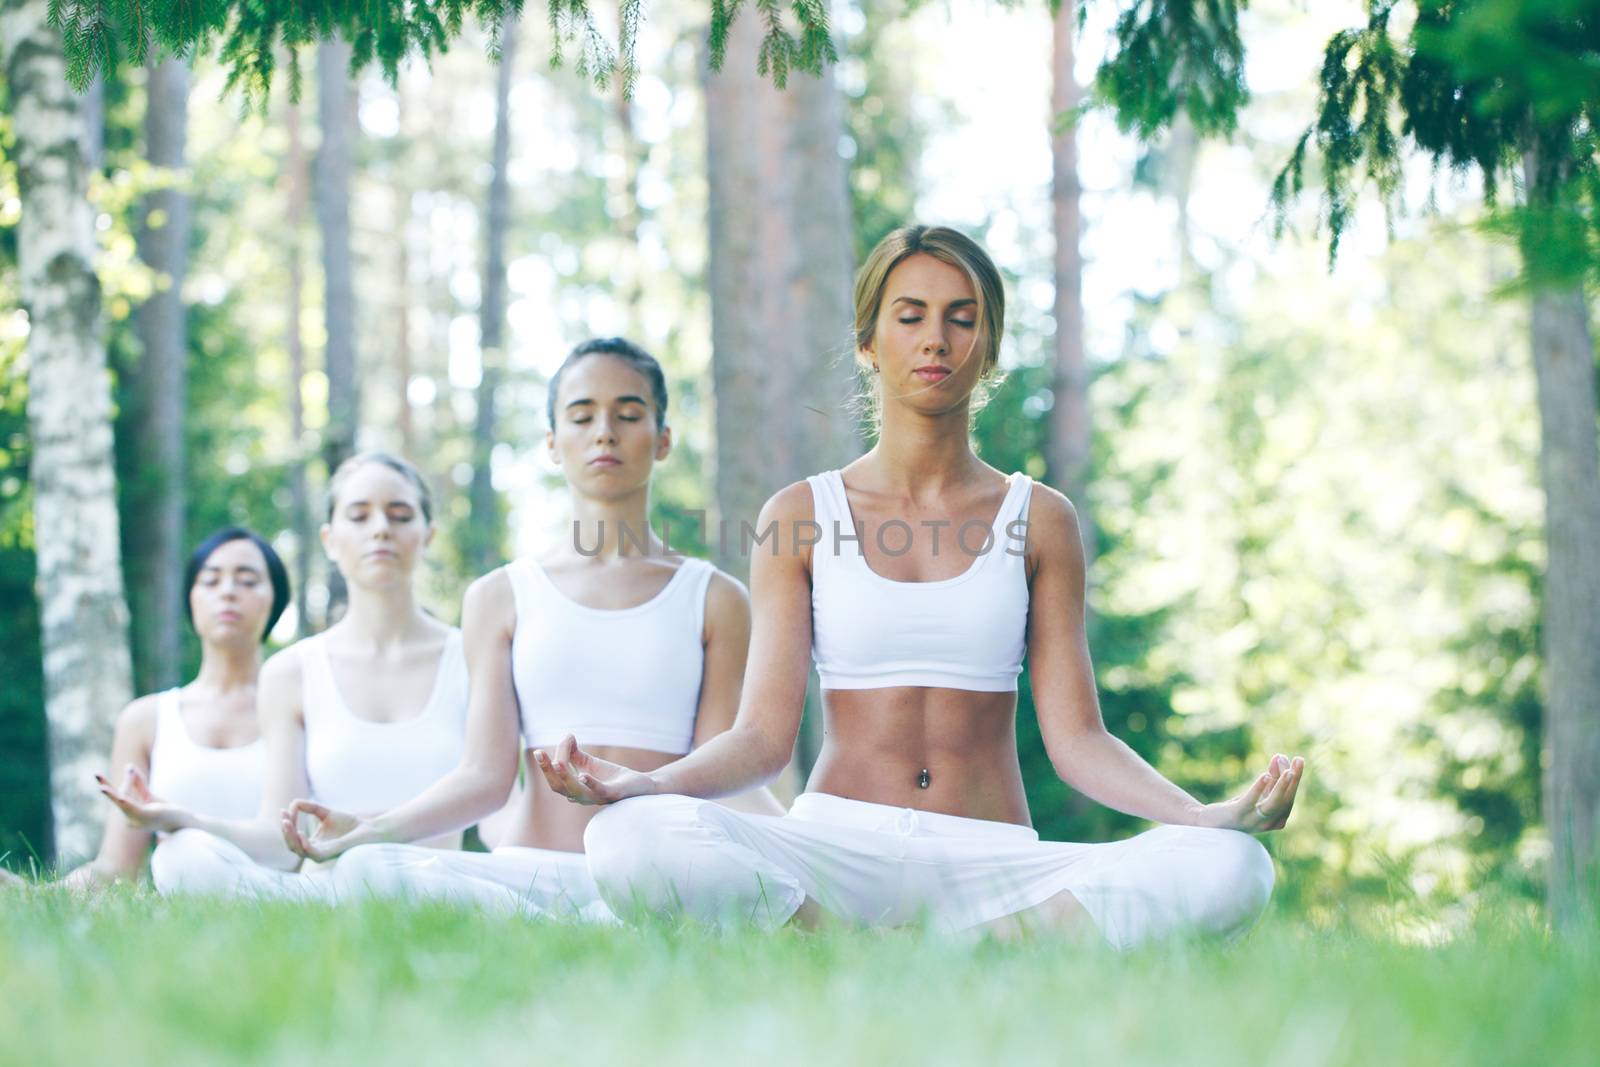 Women in white sportswear sitting in lotus position during group yoga training at park